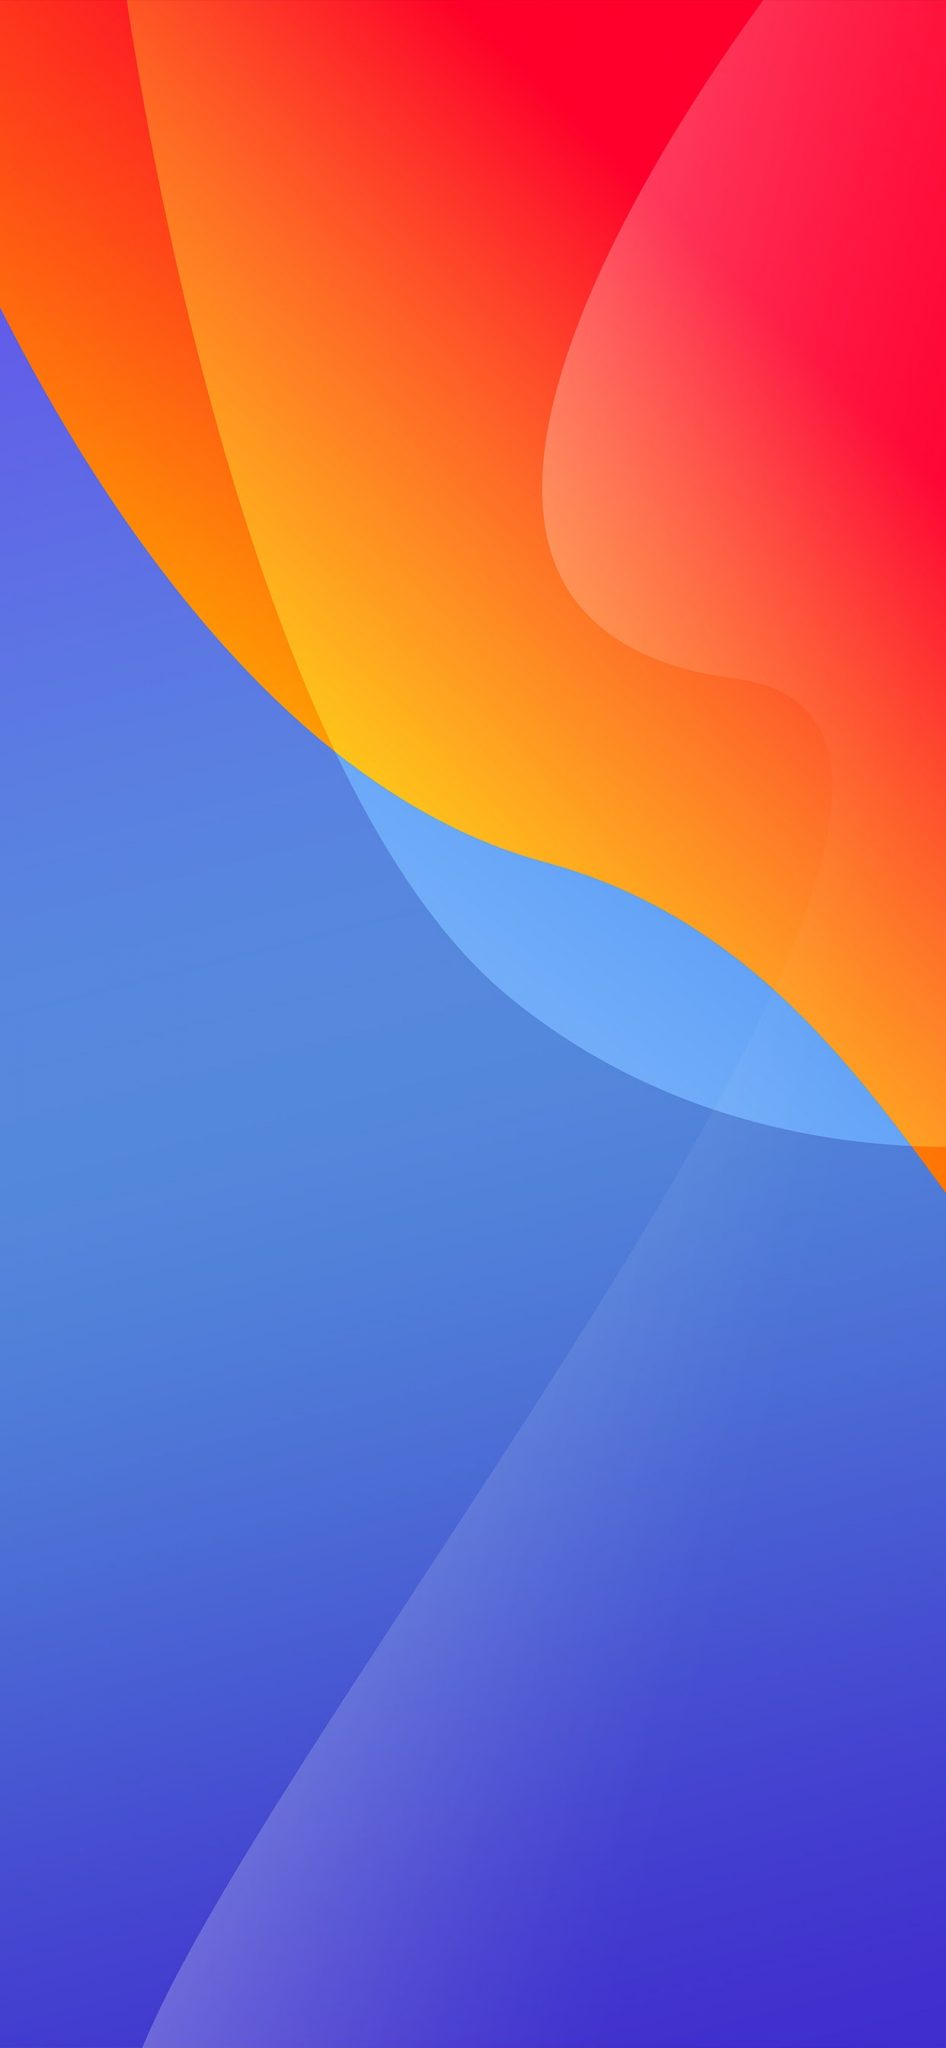 Blue to orange new gradient by @Hk3ToN on Twitter | Zollotech